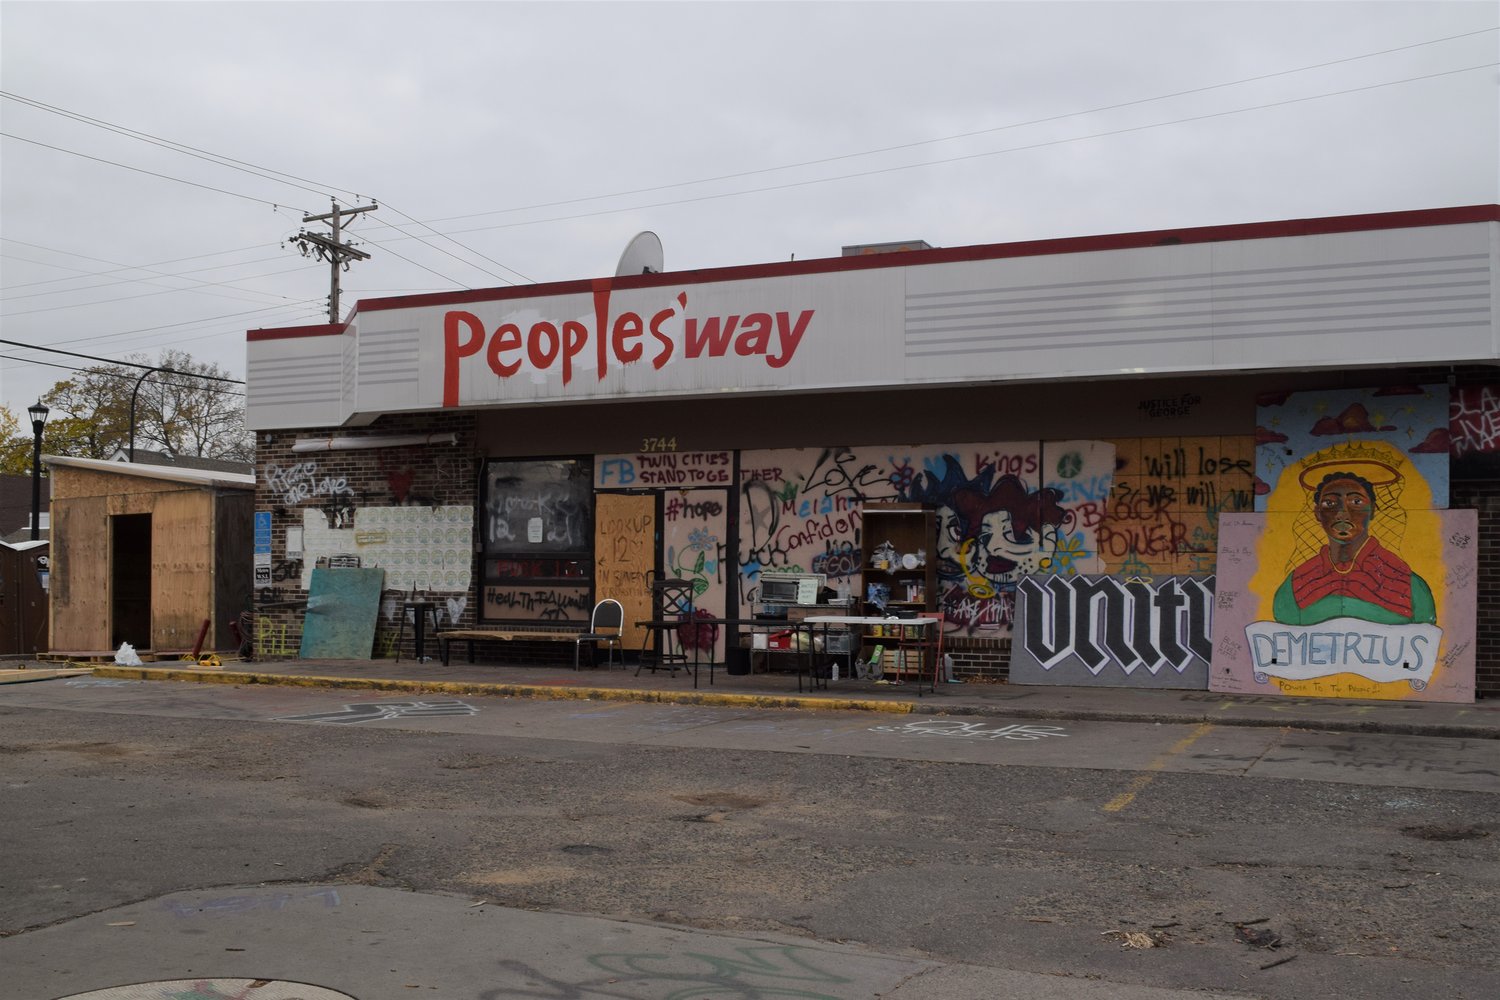 612 MASH is now located on the far end of the “Peoples’ Way” (formerly the Speedway) at George Floyd Square.